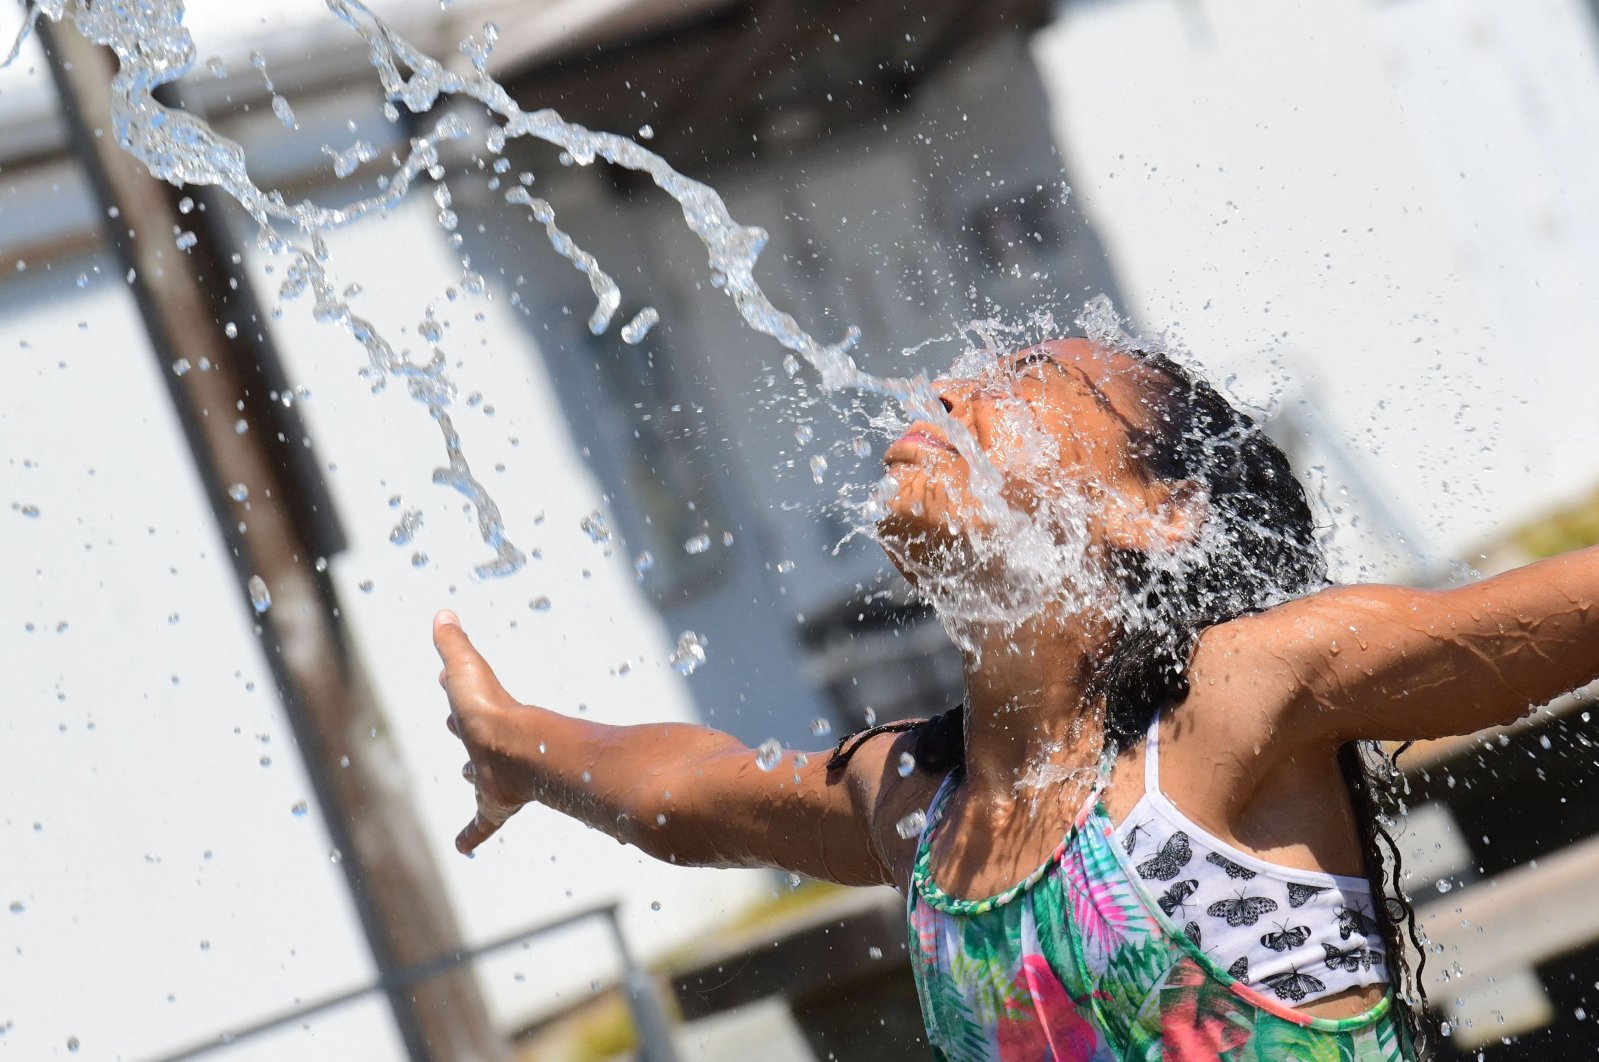 Kids cool off at a community water park on a scorching hot day in Richmond, British Columbia, Canada, June 29, 2021. (AFP Photo)